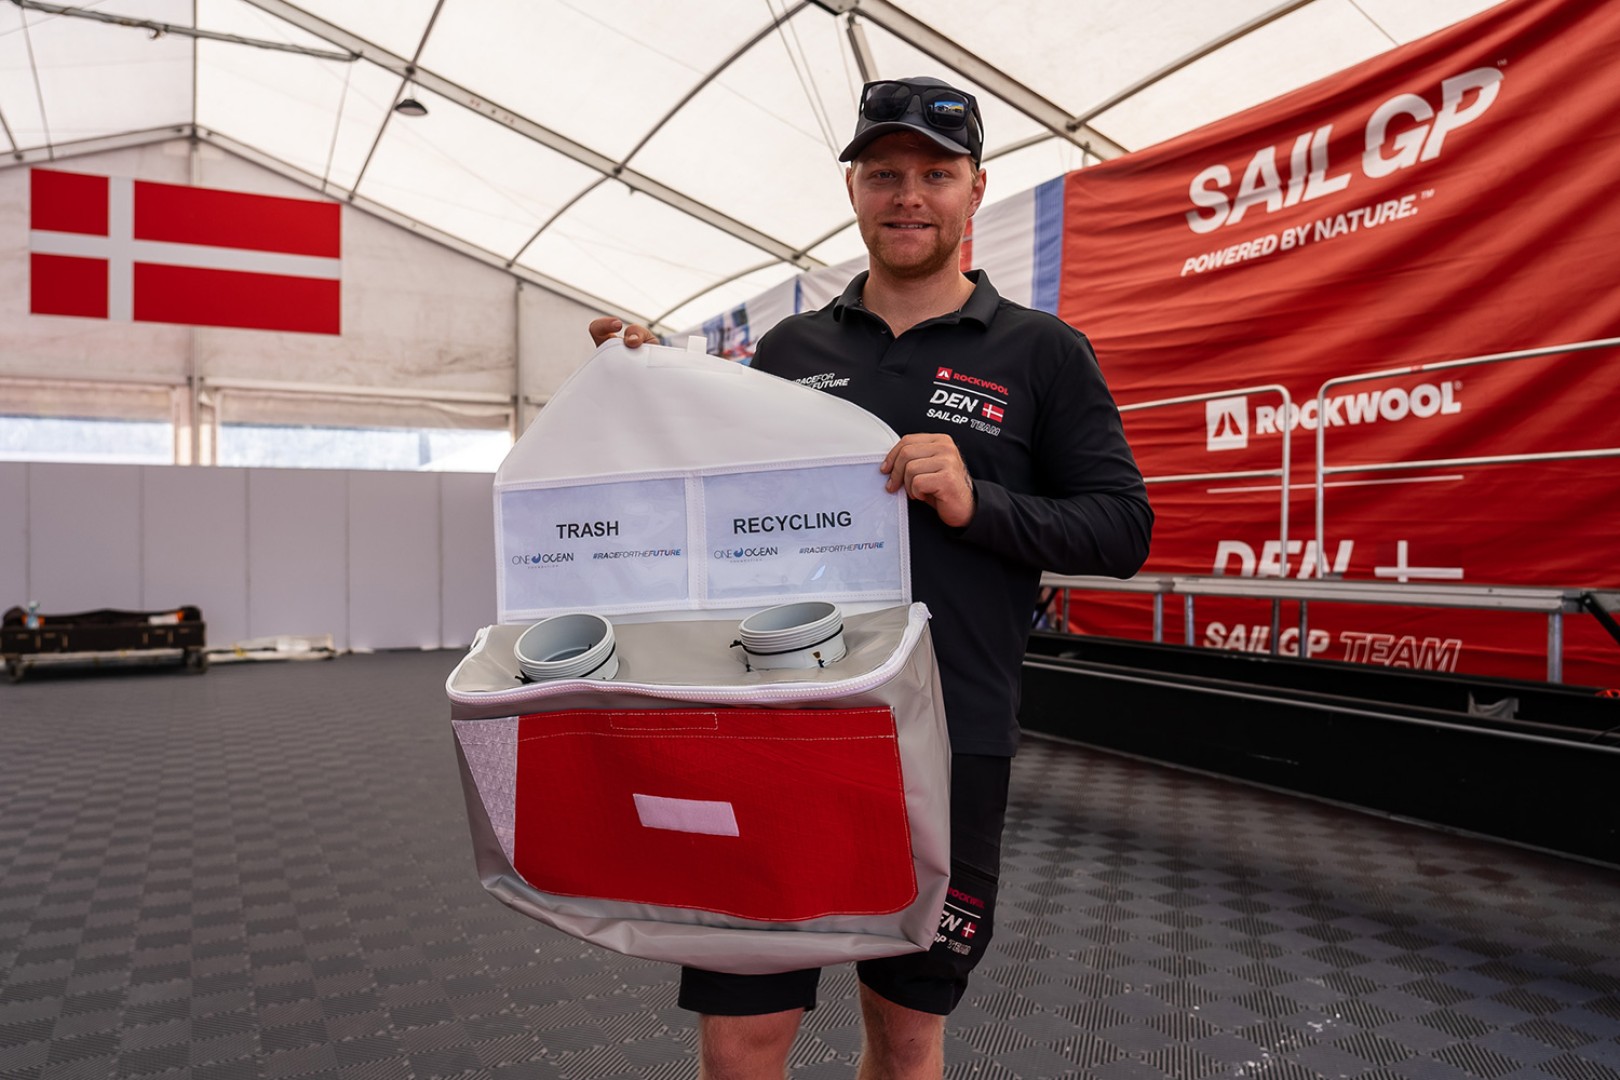 OOF and Denmark SailGP give used sails a second life